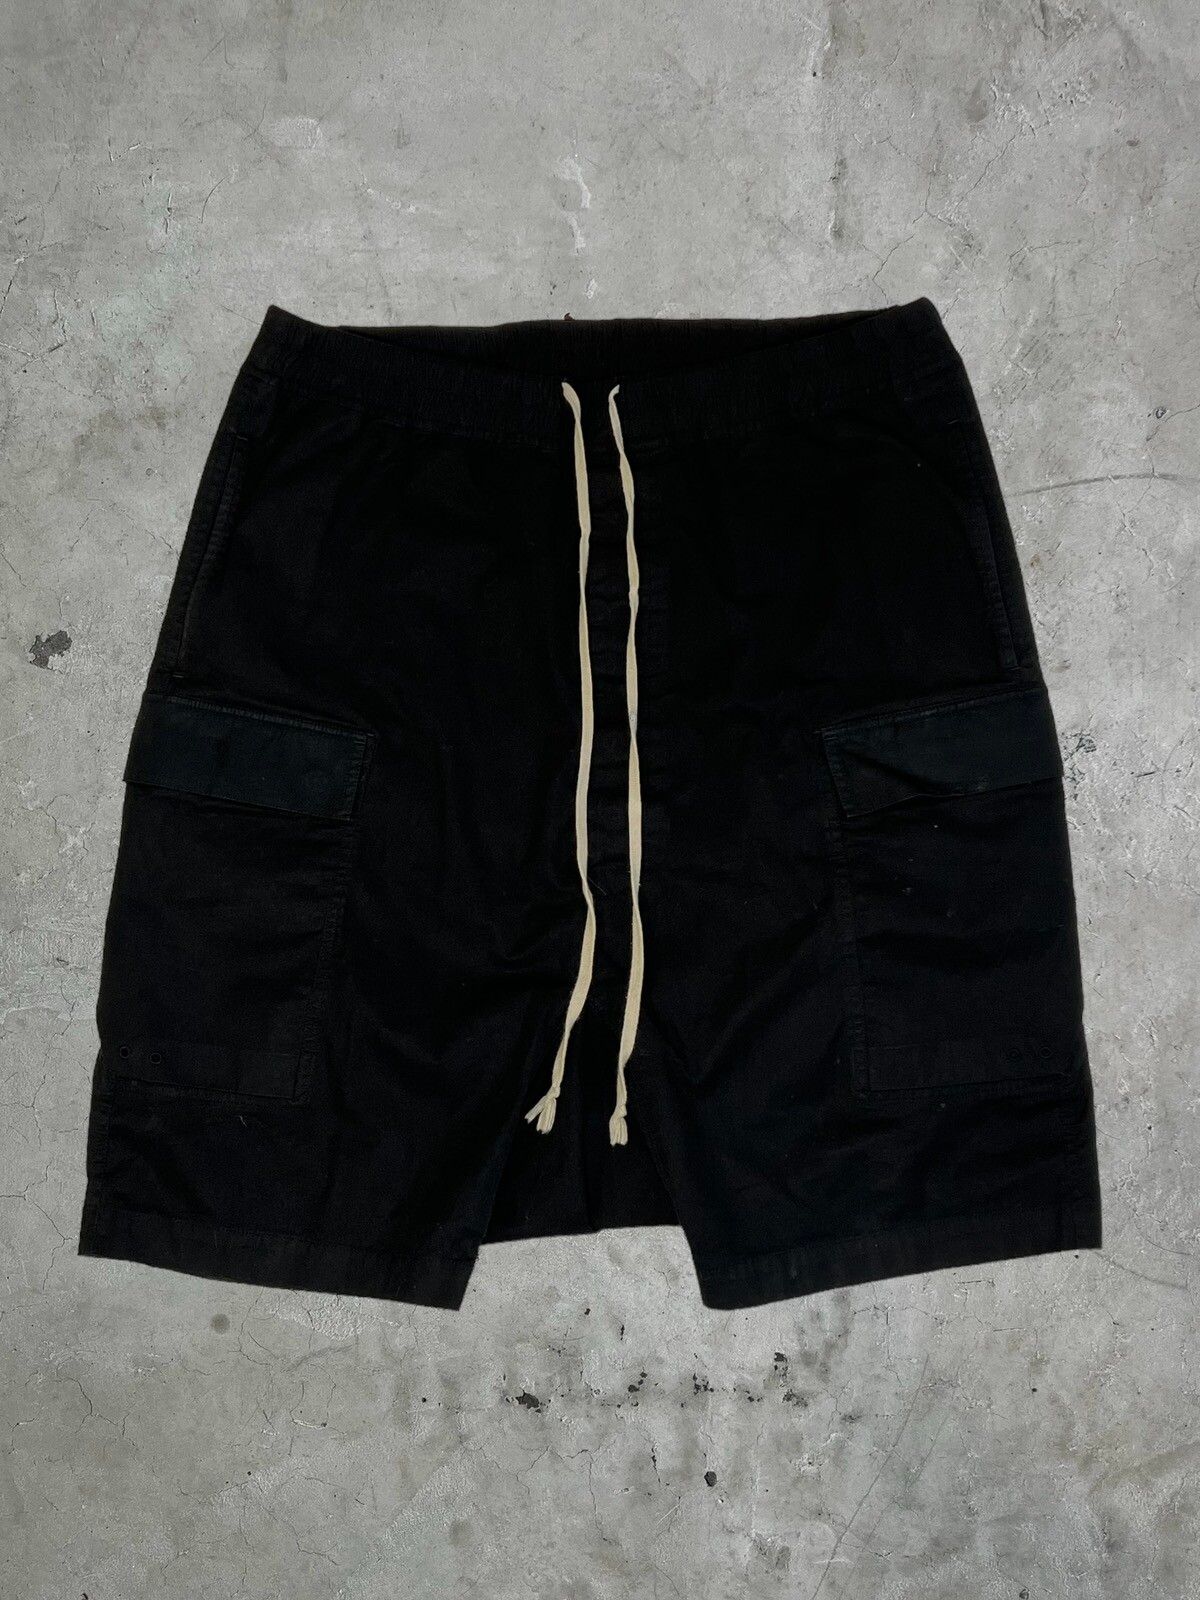 Pre-owned Rick Owens Fw/18 Black Shorts